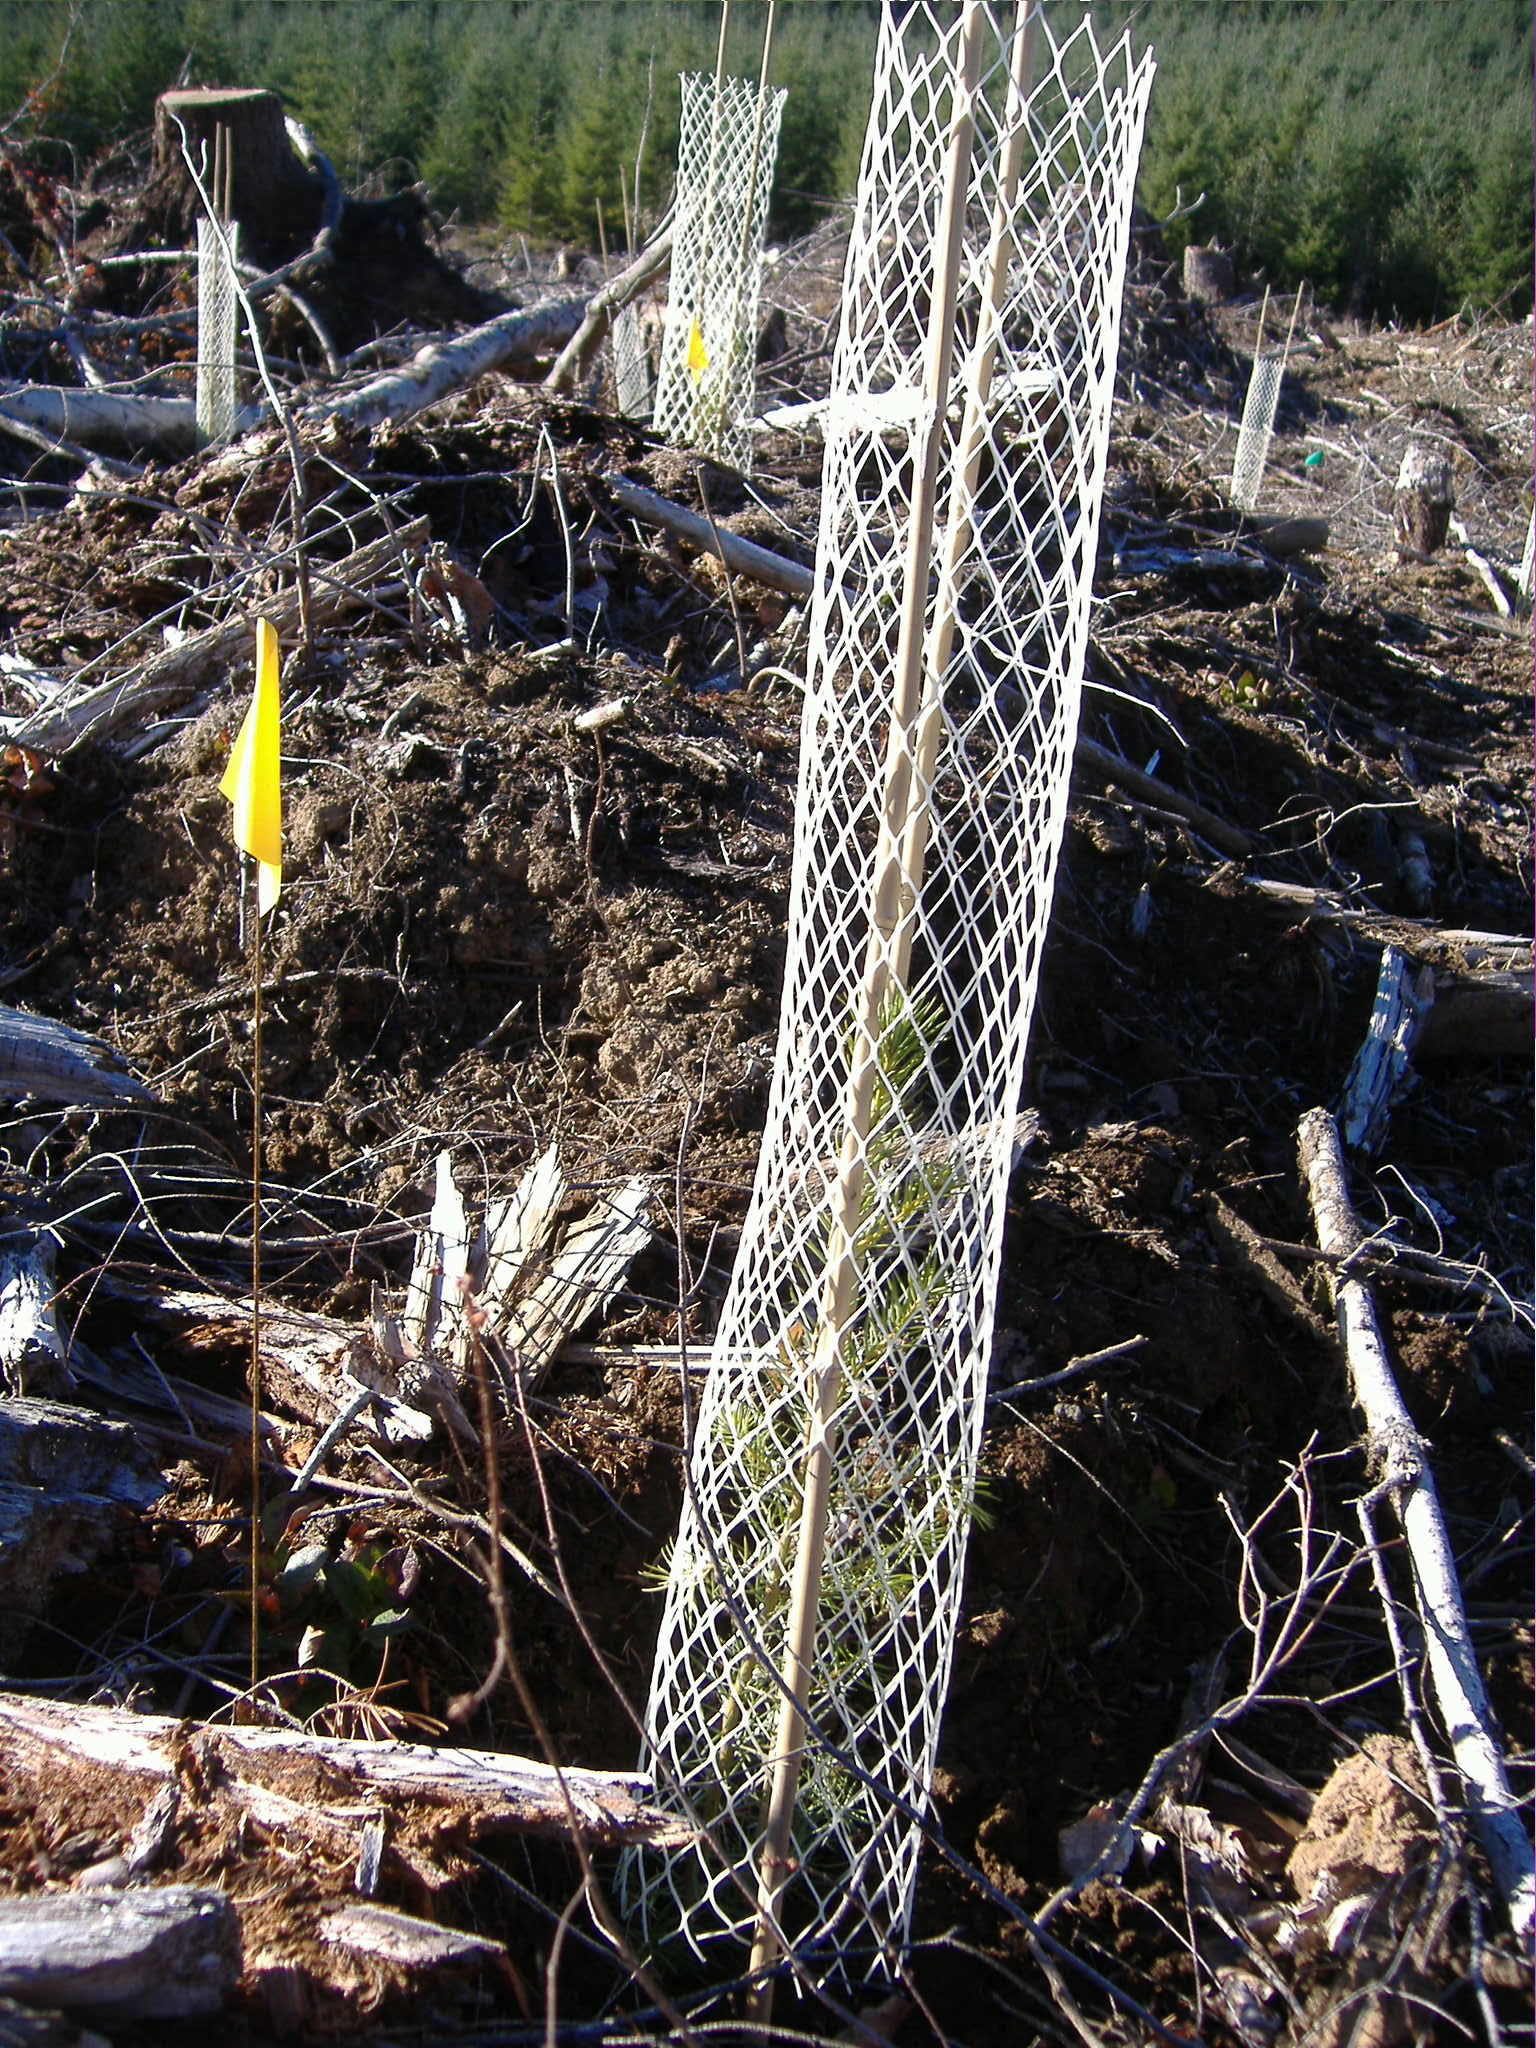 On sites where deer and elk browsing can be a problem, installing mesh tubes can help protect newly planted seedlings from animal damage